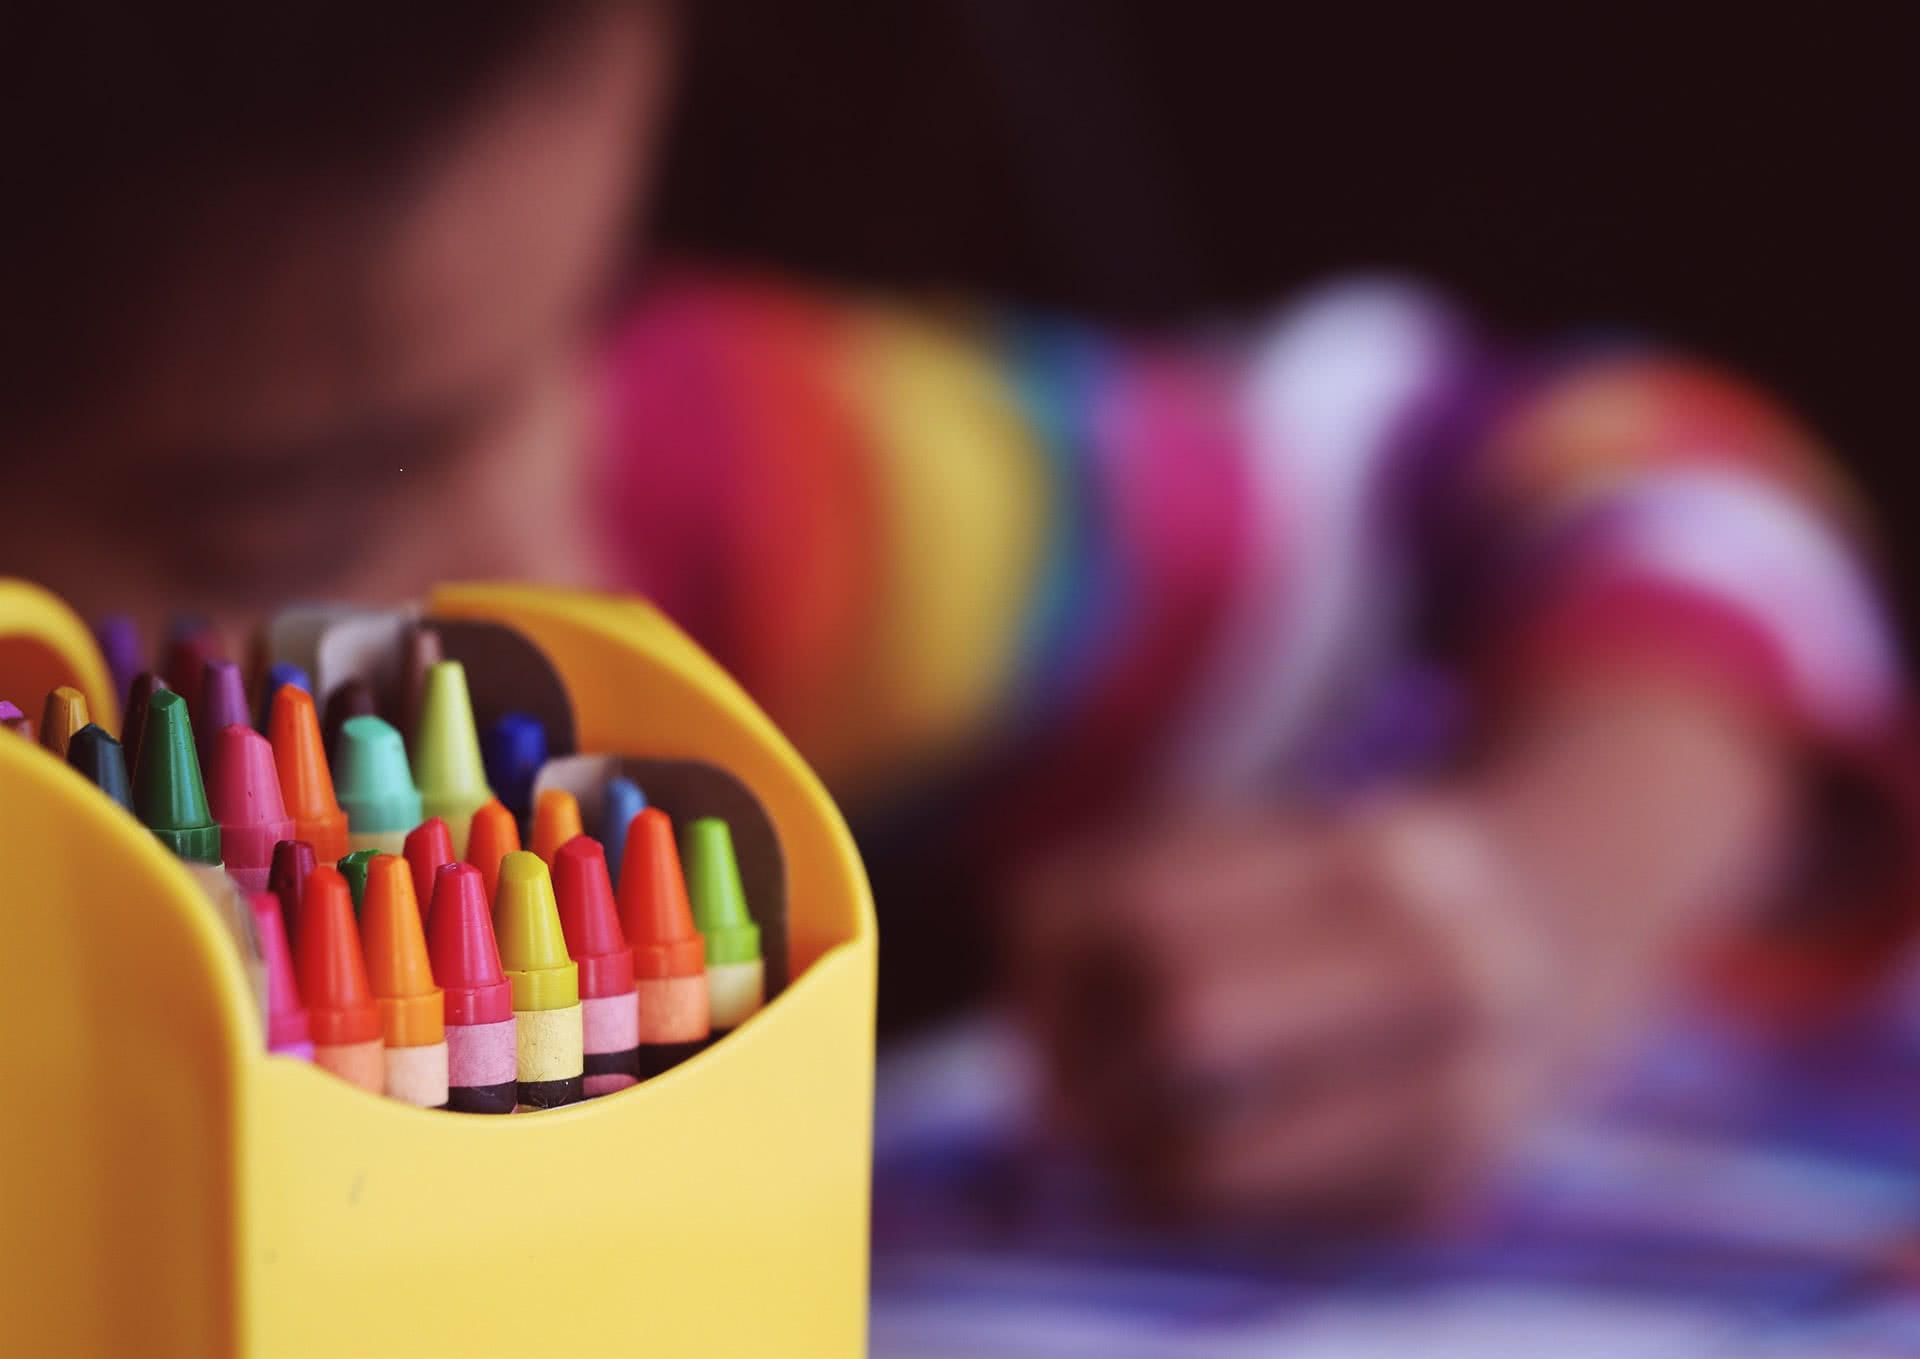 An image of a pack of crayons with a child in the background.